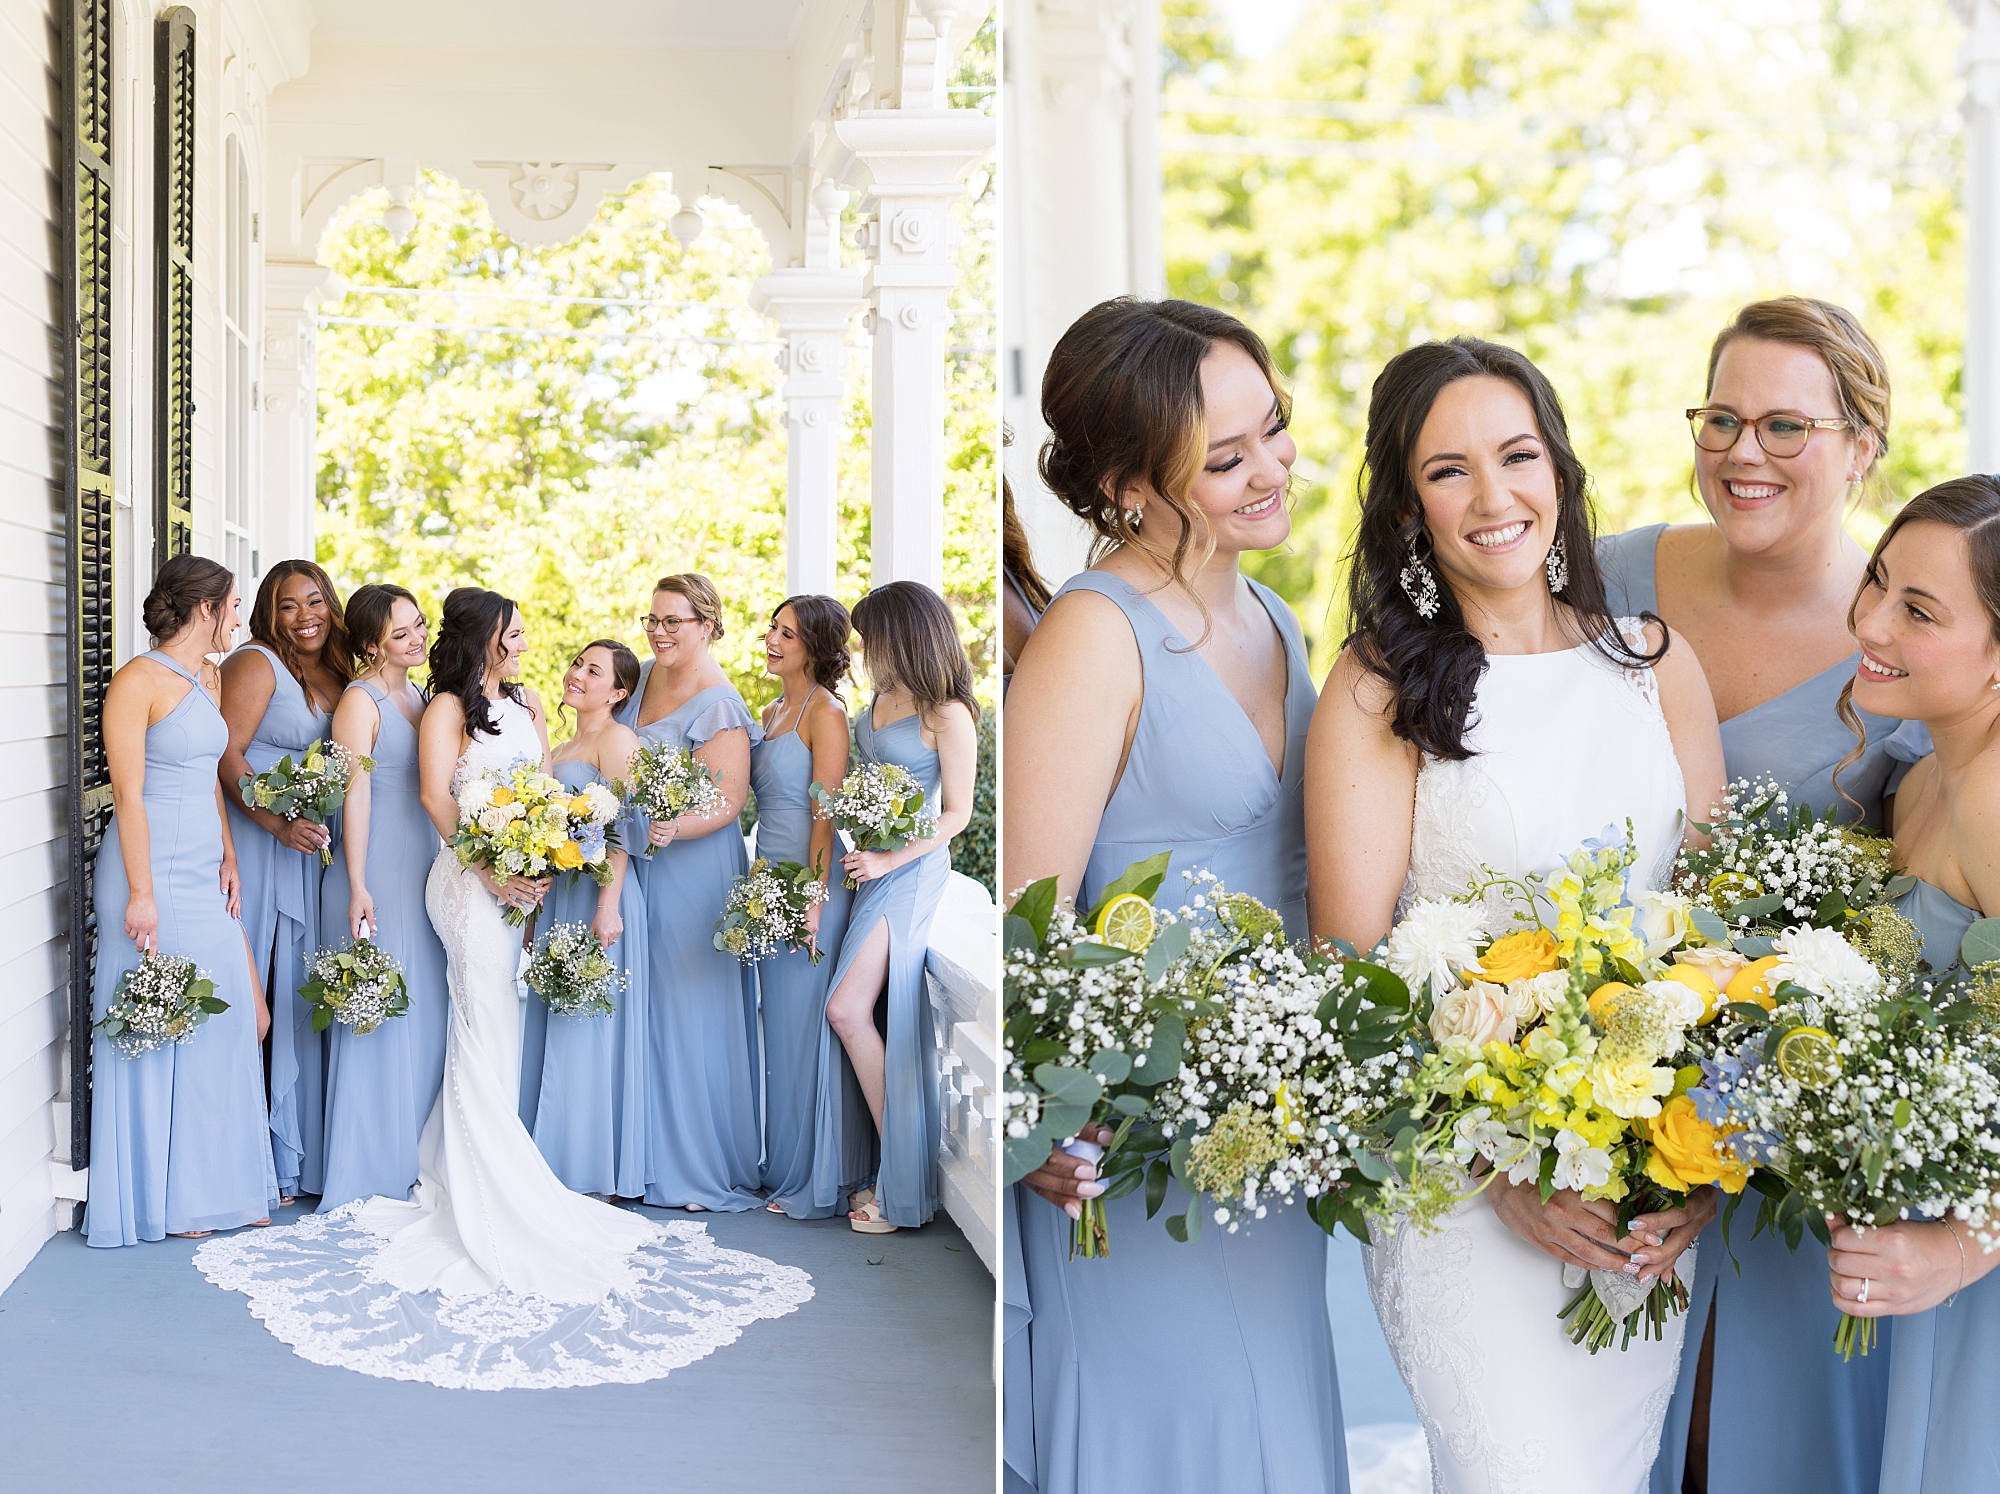 Bride with her bridesmaids | Raleigh NC Wedding Photographer